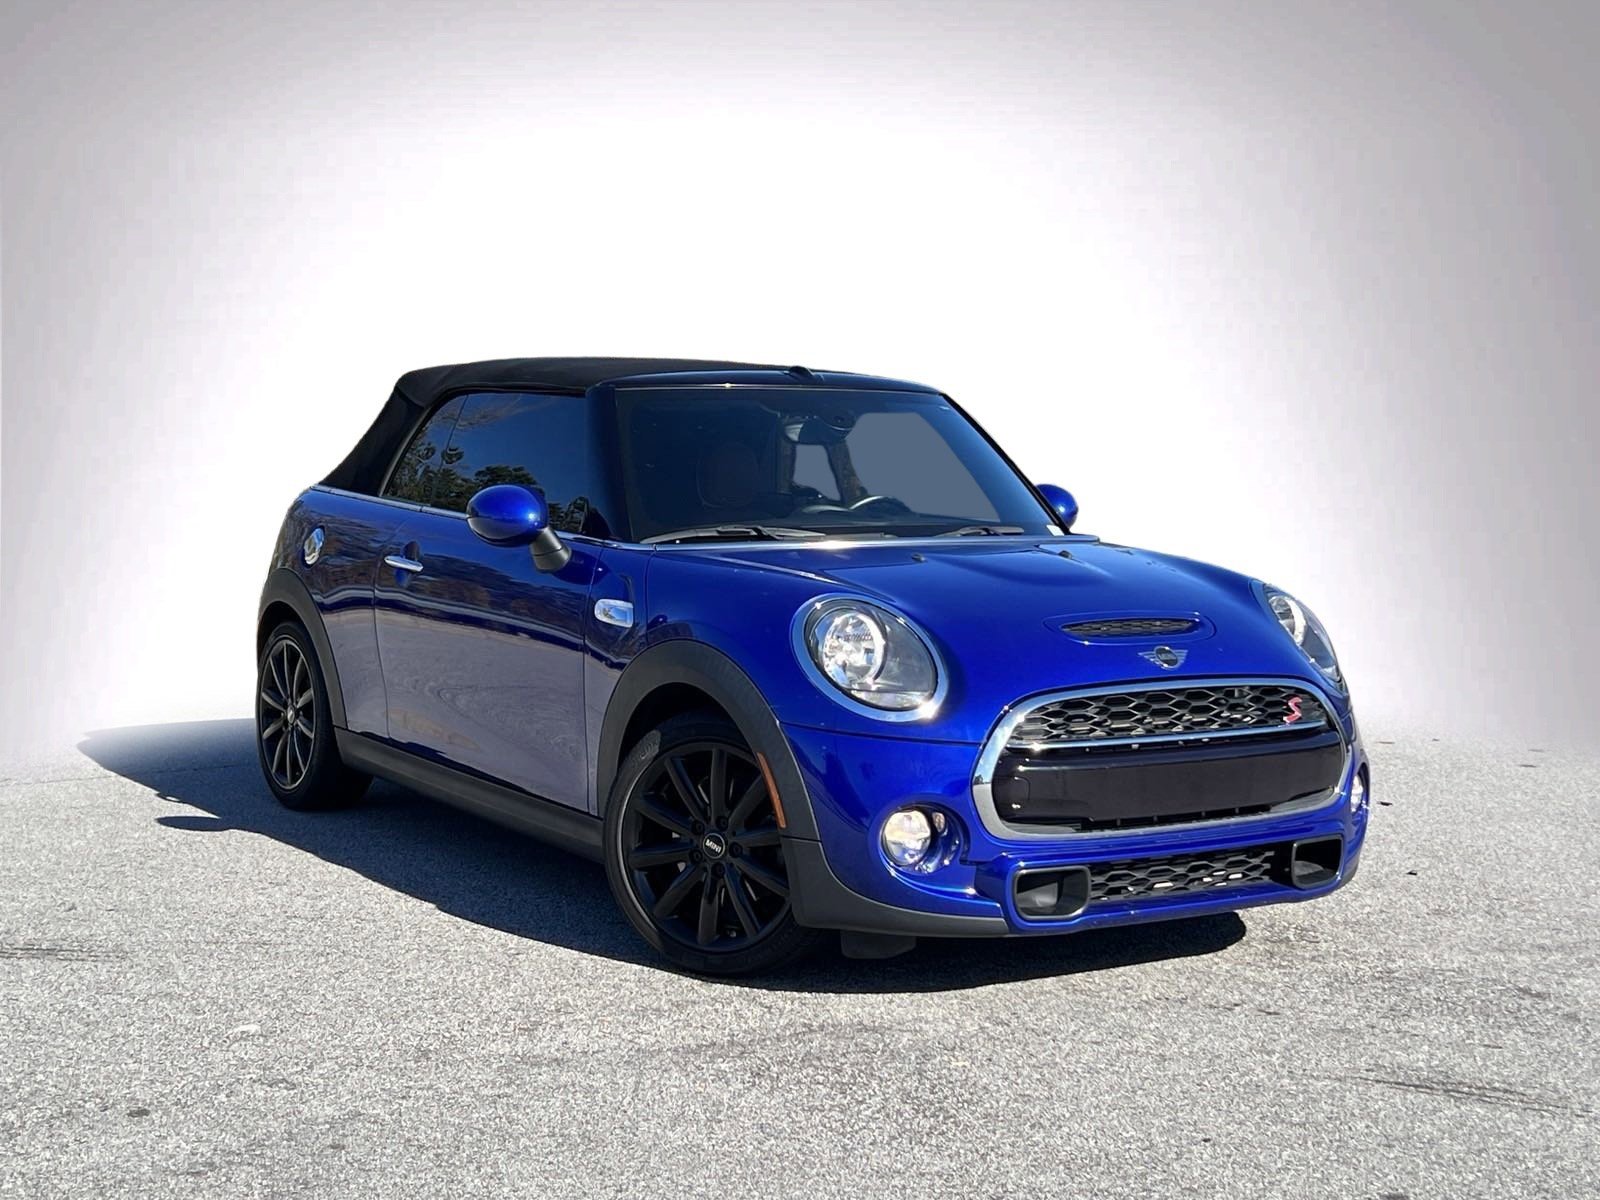 Pre-Owned 2019 MINI Convertible Cooper S Convertible in Merriam #Q06643A |  Hendrick Chevrolet Shawnee Mission